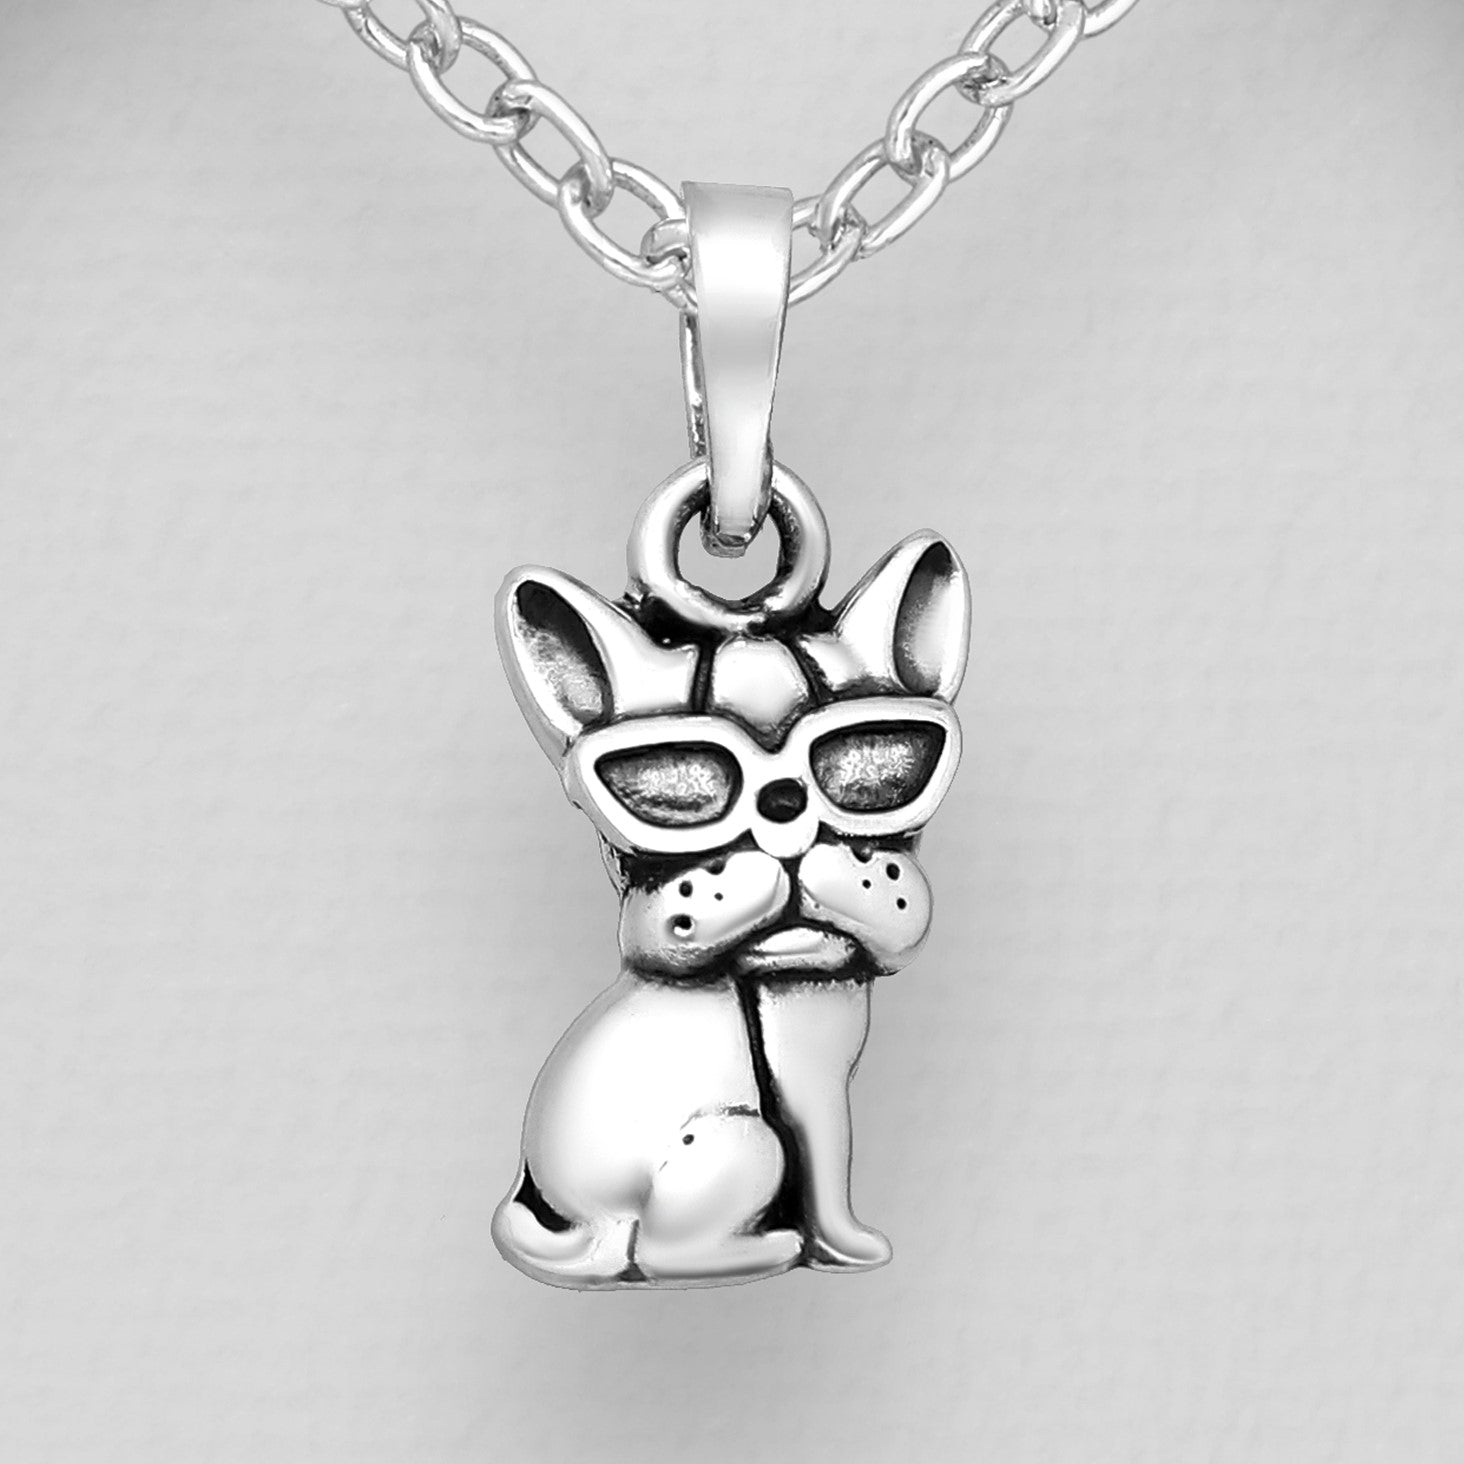 French Bulldog Necklace, head pendant - recycled .925 Sterling Silver